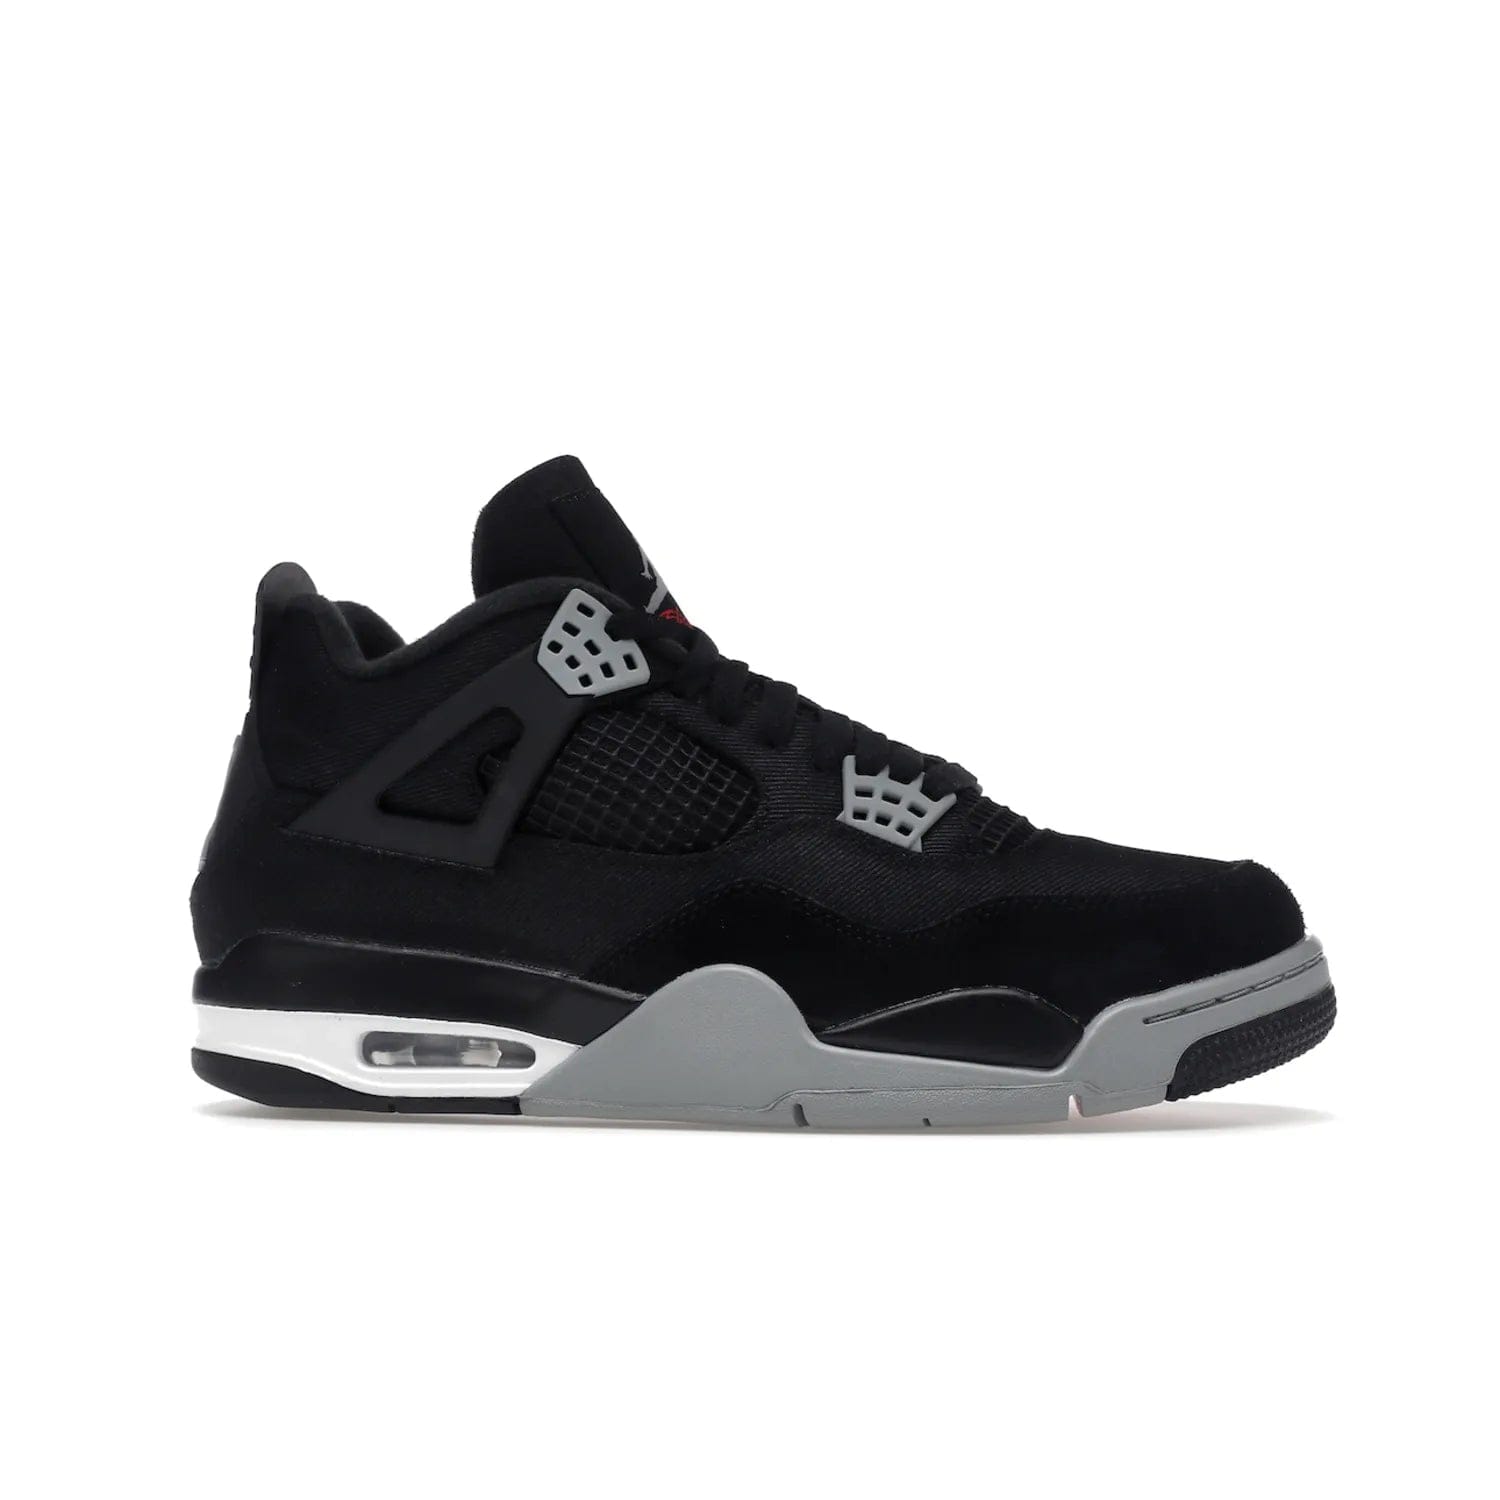 Jordan 4 Retro SE Black Canvas - Image 2 - Only at www.BallersClubKickz.com - The Air Jordan 4 Retro SE Black Canvas brings timeless style and modern luxury. Classic mid-top sneaker in black canvas and grey suede with tonal Jumpman logo, Flight logo and polyurethane midsole with visible Air-sole cushioning. Refresh your sneaker collection and rock the Air Jordan 4 Retro SE Black Canvas.